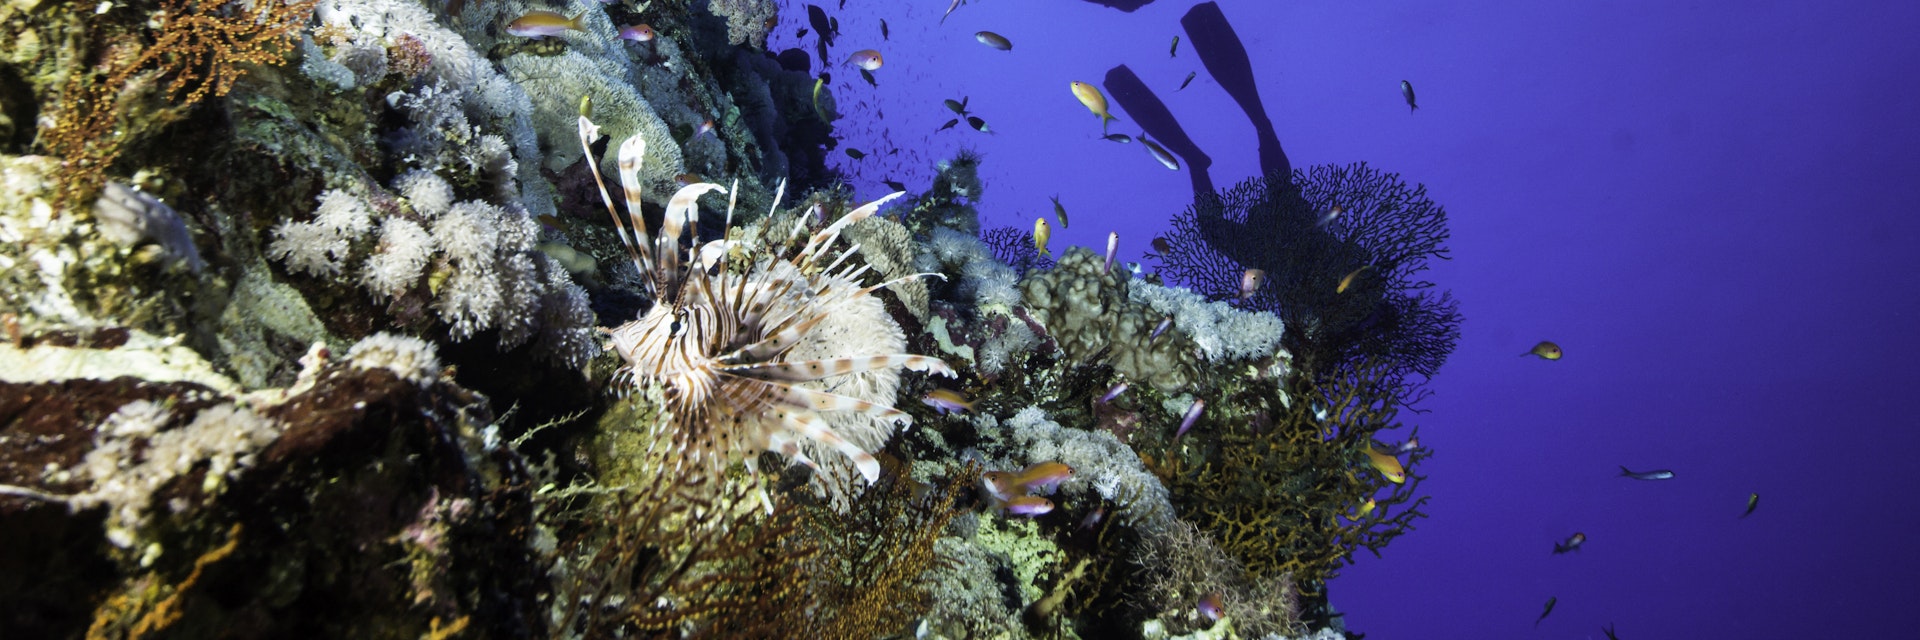 Underwater scene with a lionfish and a group of scuba divers at the famous Elphinstone at Egypt.
